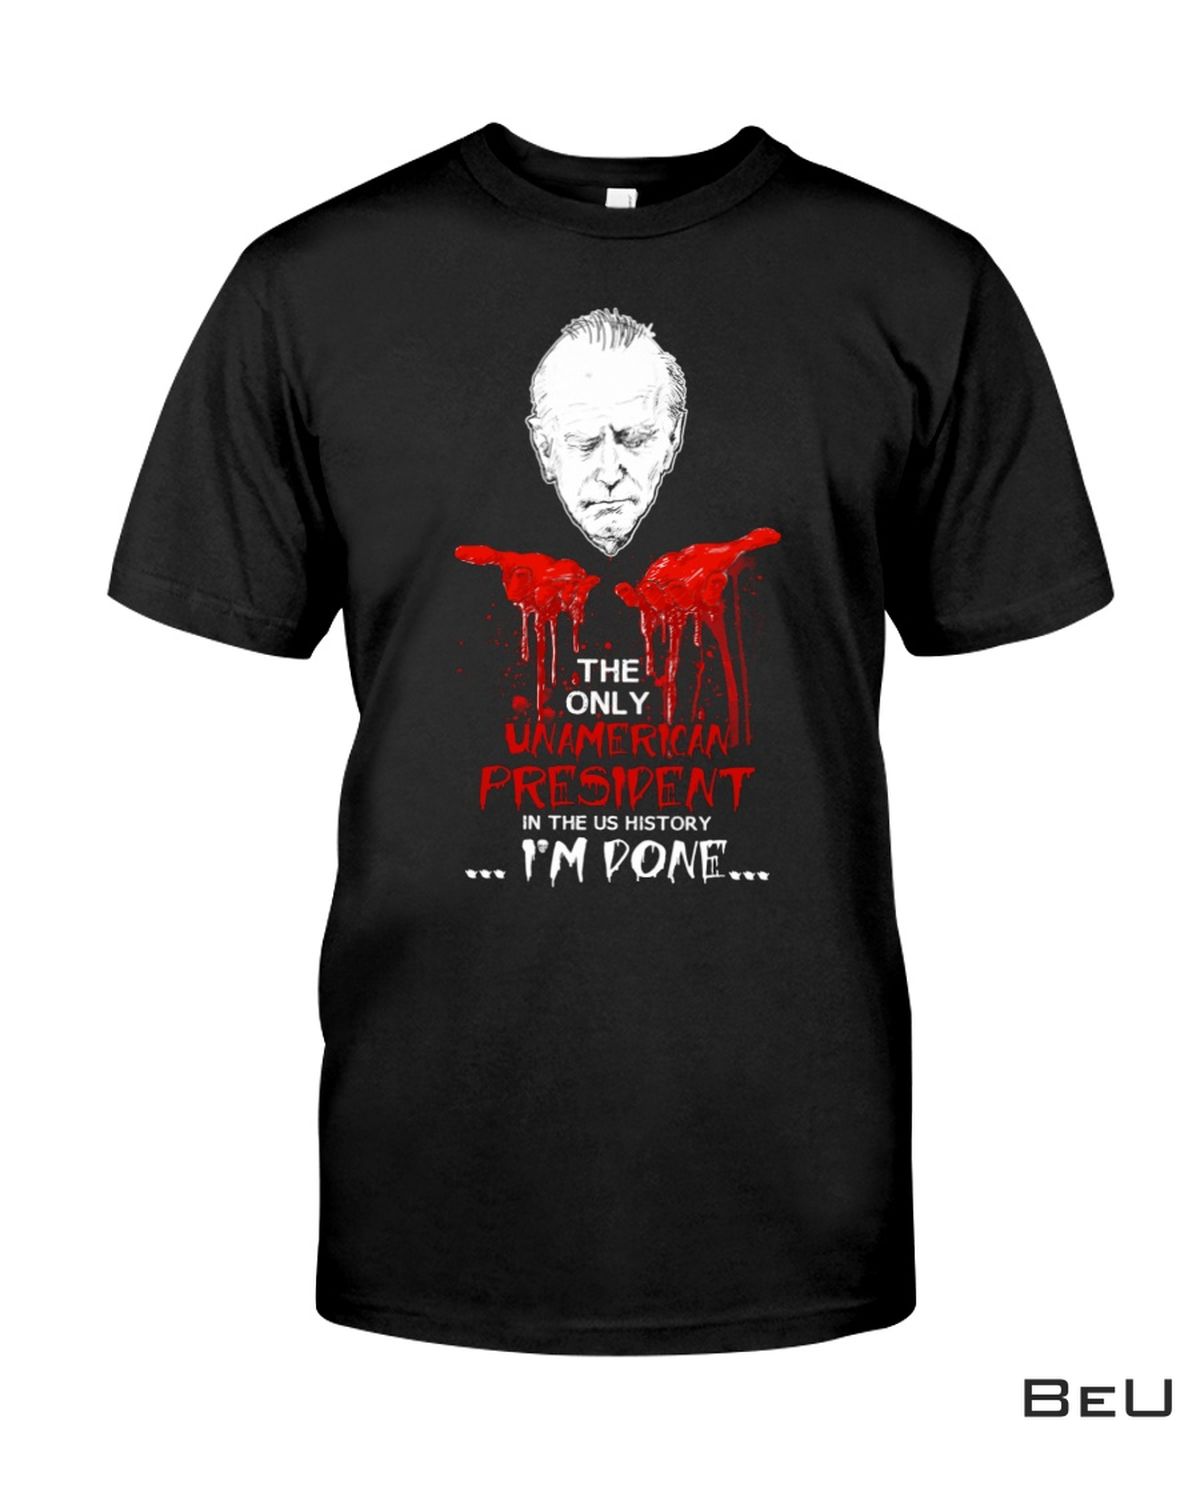 Joe Biden The Only Unamerican President In The Us History I'm Done Shirt